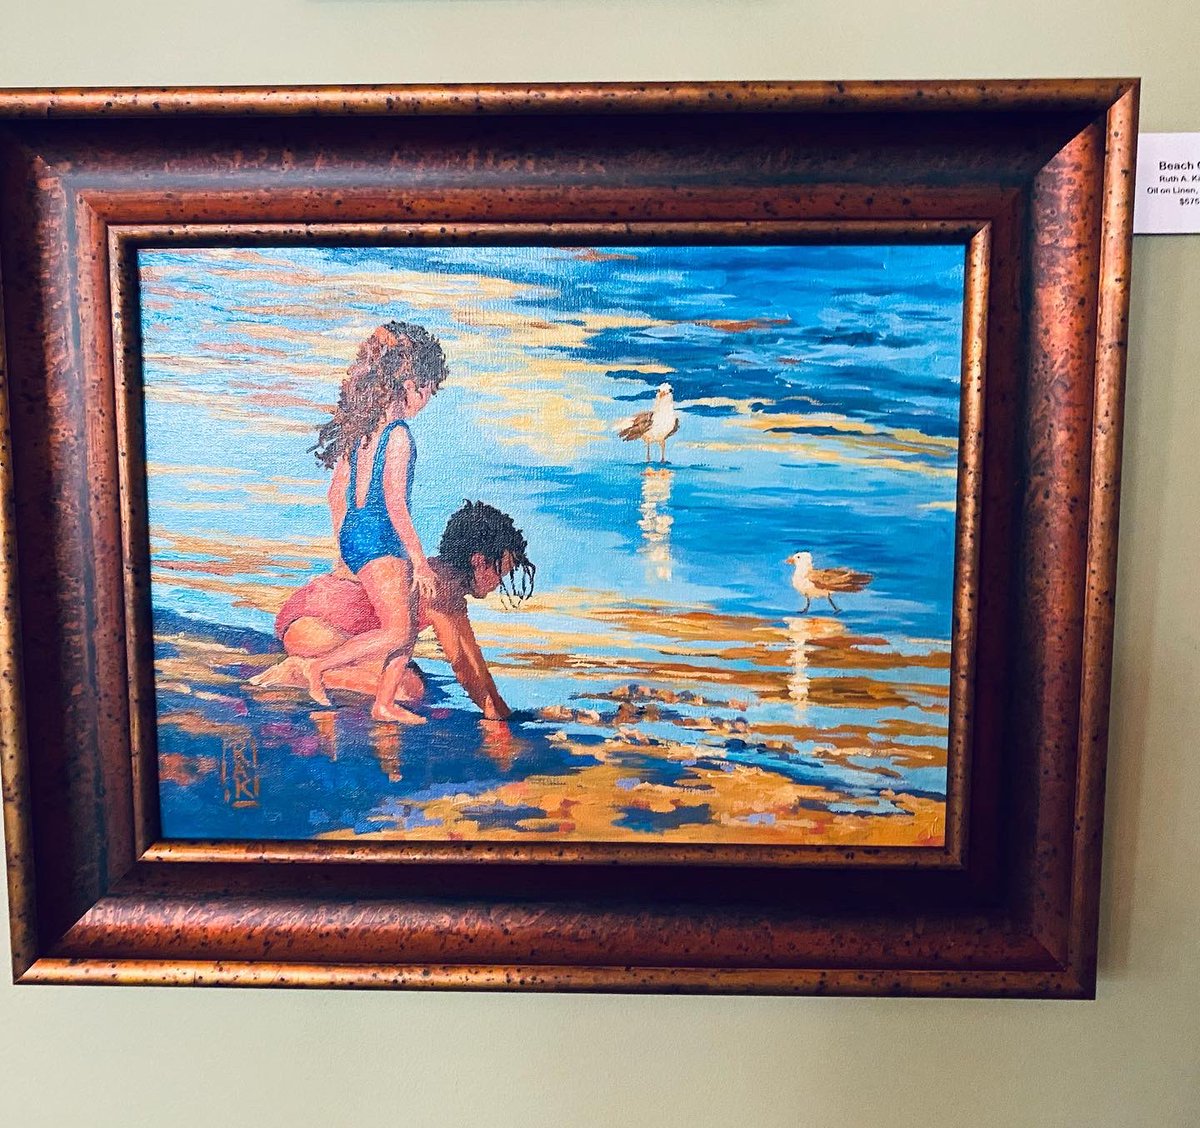 Looking for the perfect souvenir to remember your visit to the Grand Traverse region? How about an original piece of art?! Bring the beauty and scenery of the area home with you to cherish in between your trips up north! Stop in today to see the works on display!